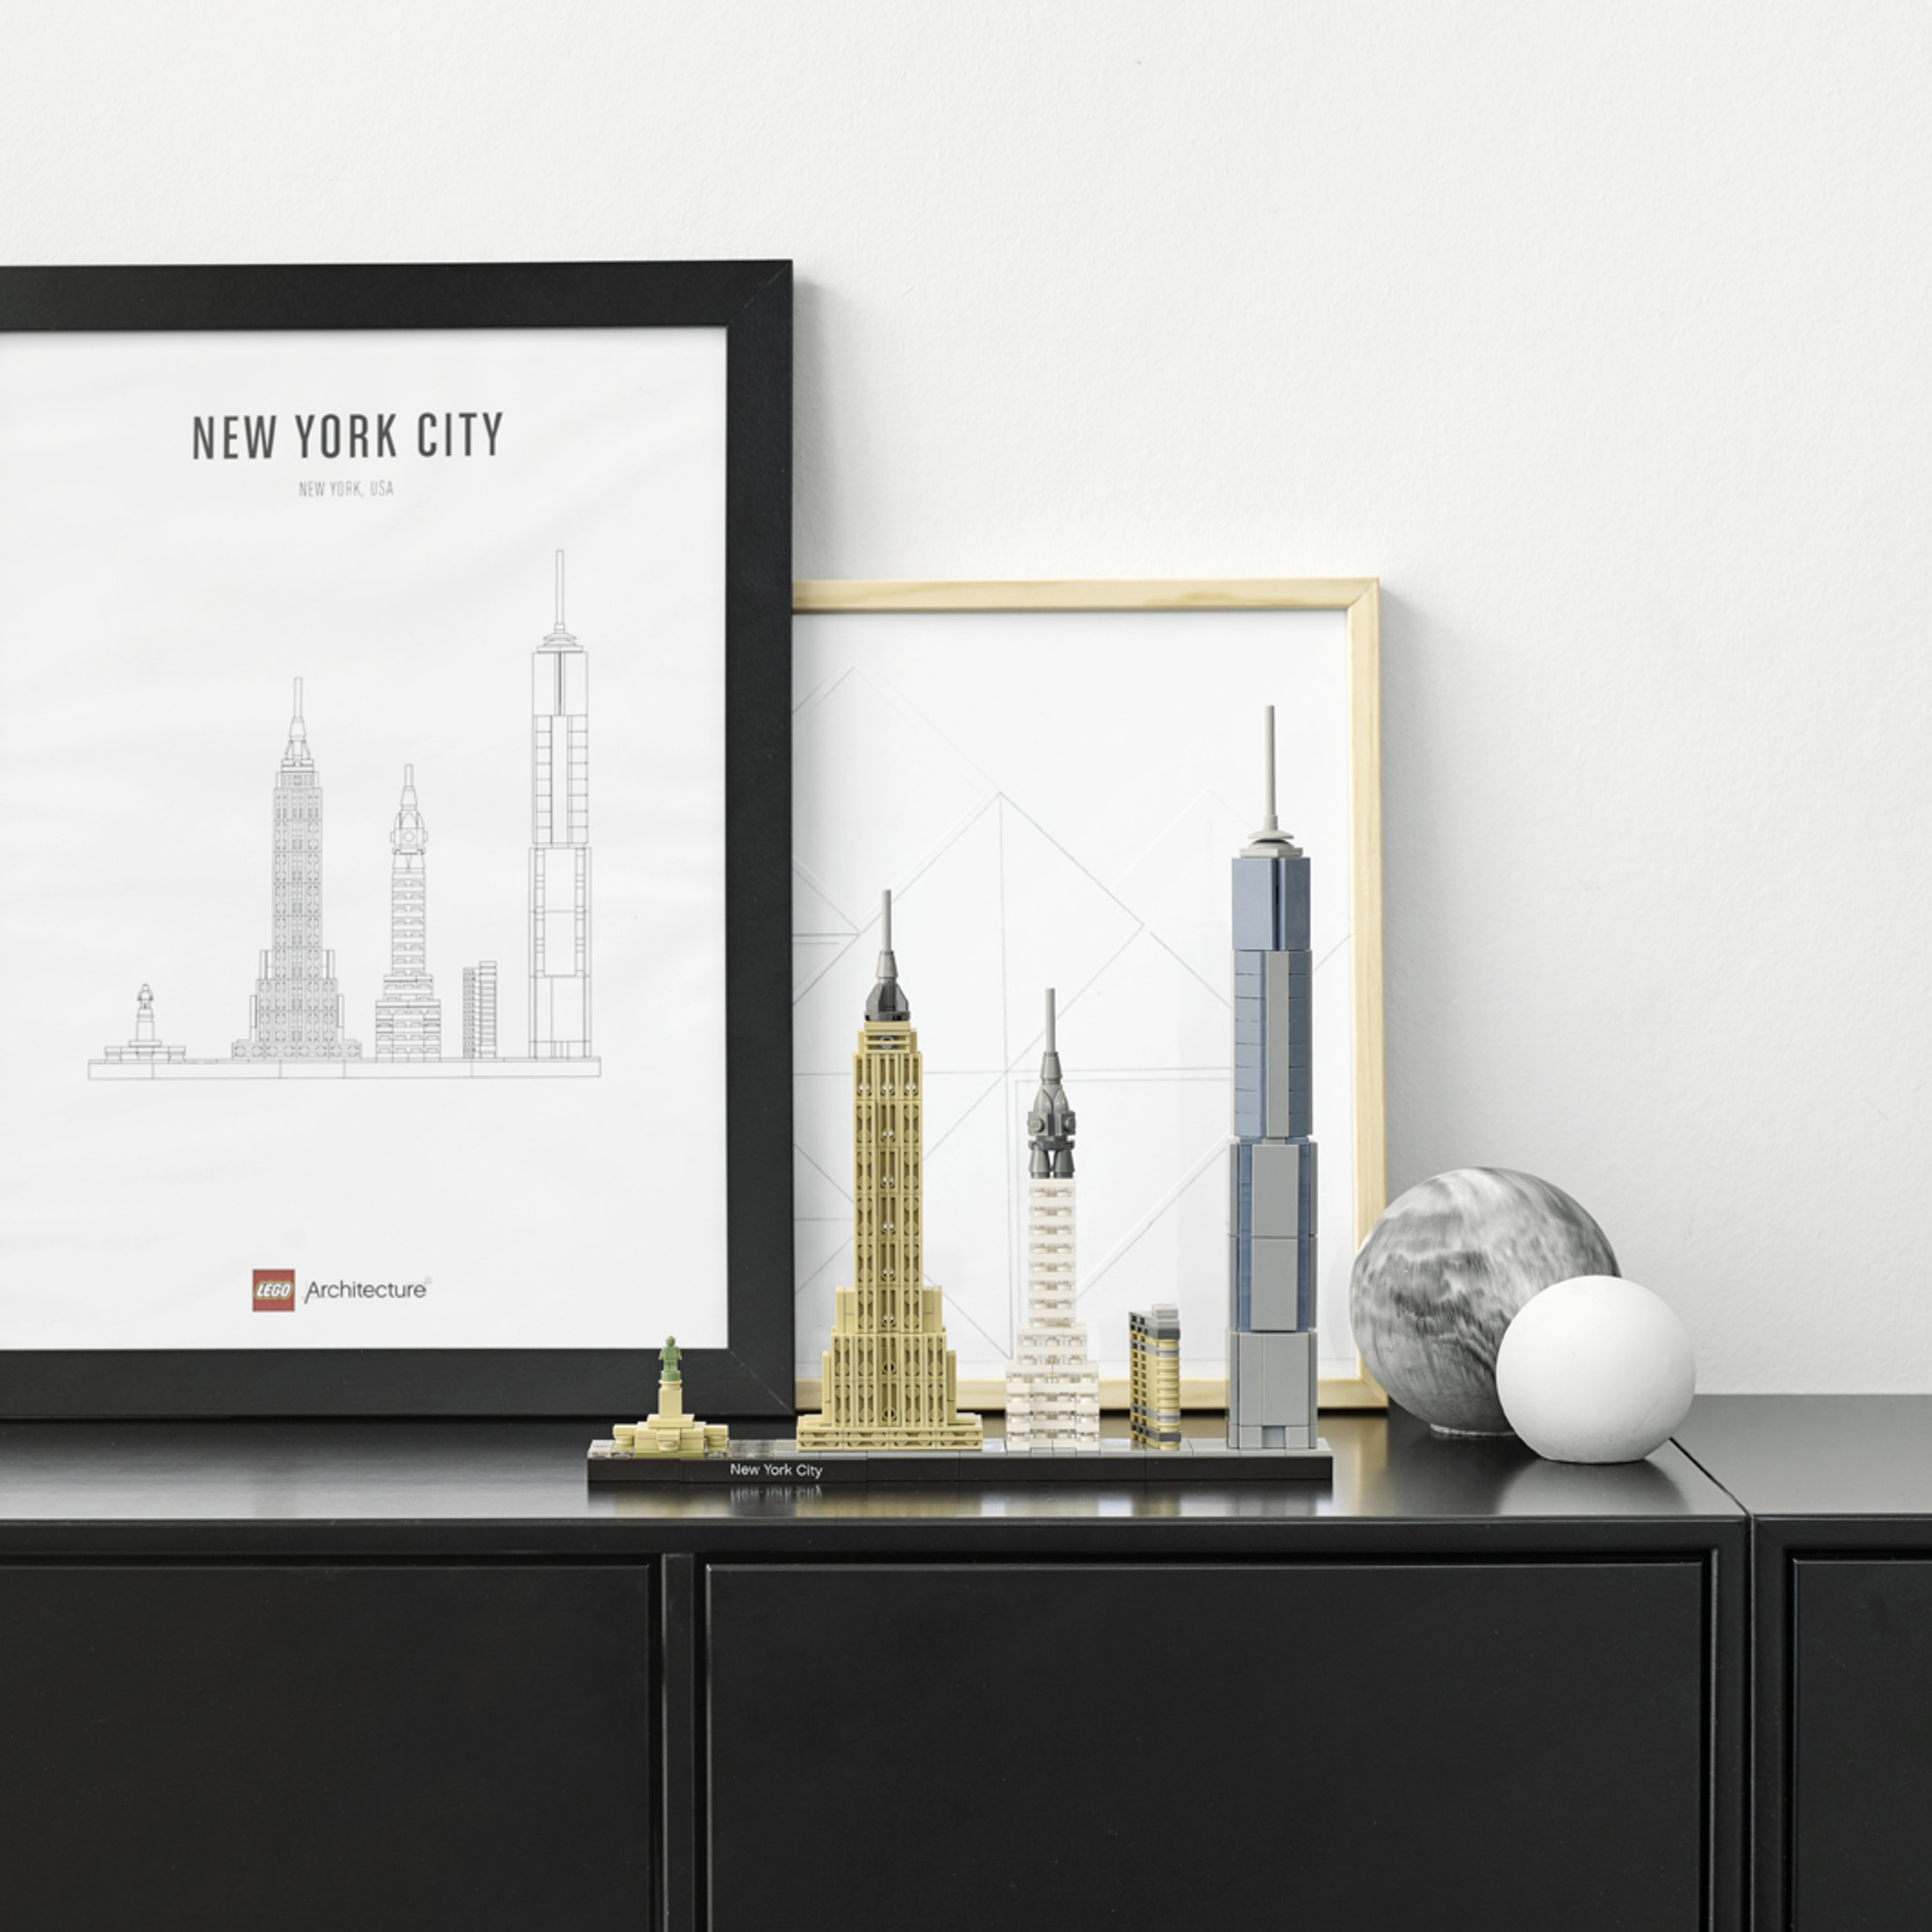 LEGO Architecture New York City Skyline 21028, Collectible Model Kit for Adults to Build, Creative Activity, Home Décor Gift Idea - image 4 of 5